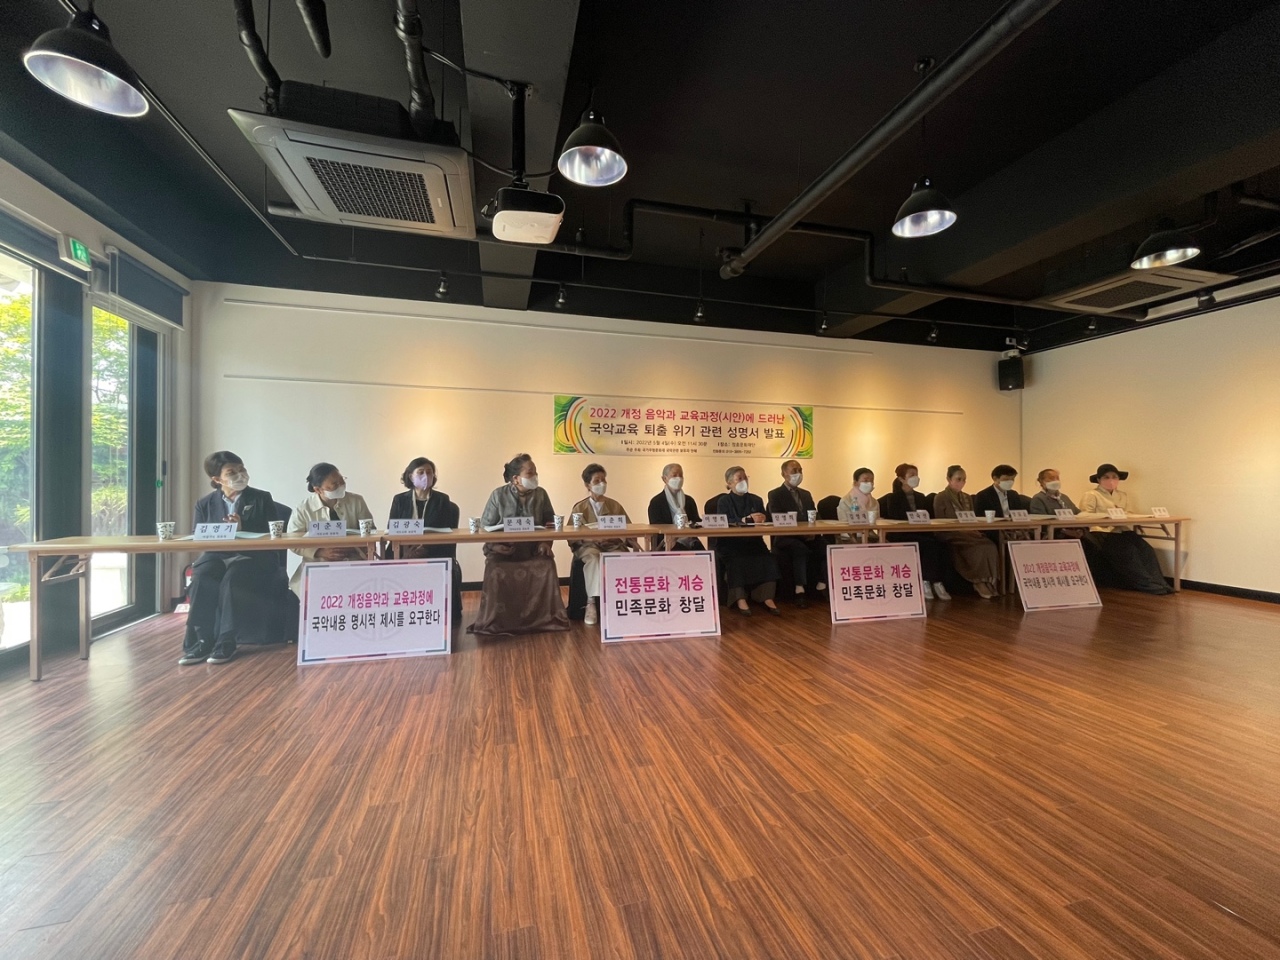 Twelve Intangible Cultural Heritage Masters protest a draft for new music curriculum on Wednesday. (Park Ga-young/The Korea Herald)